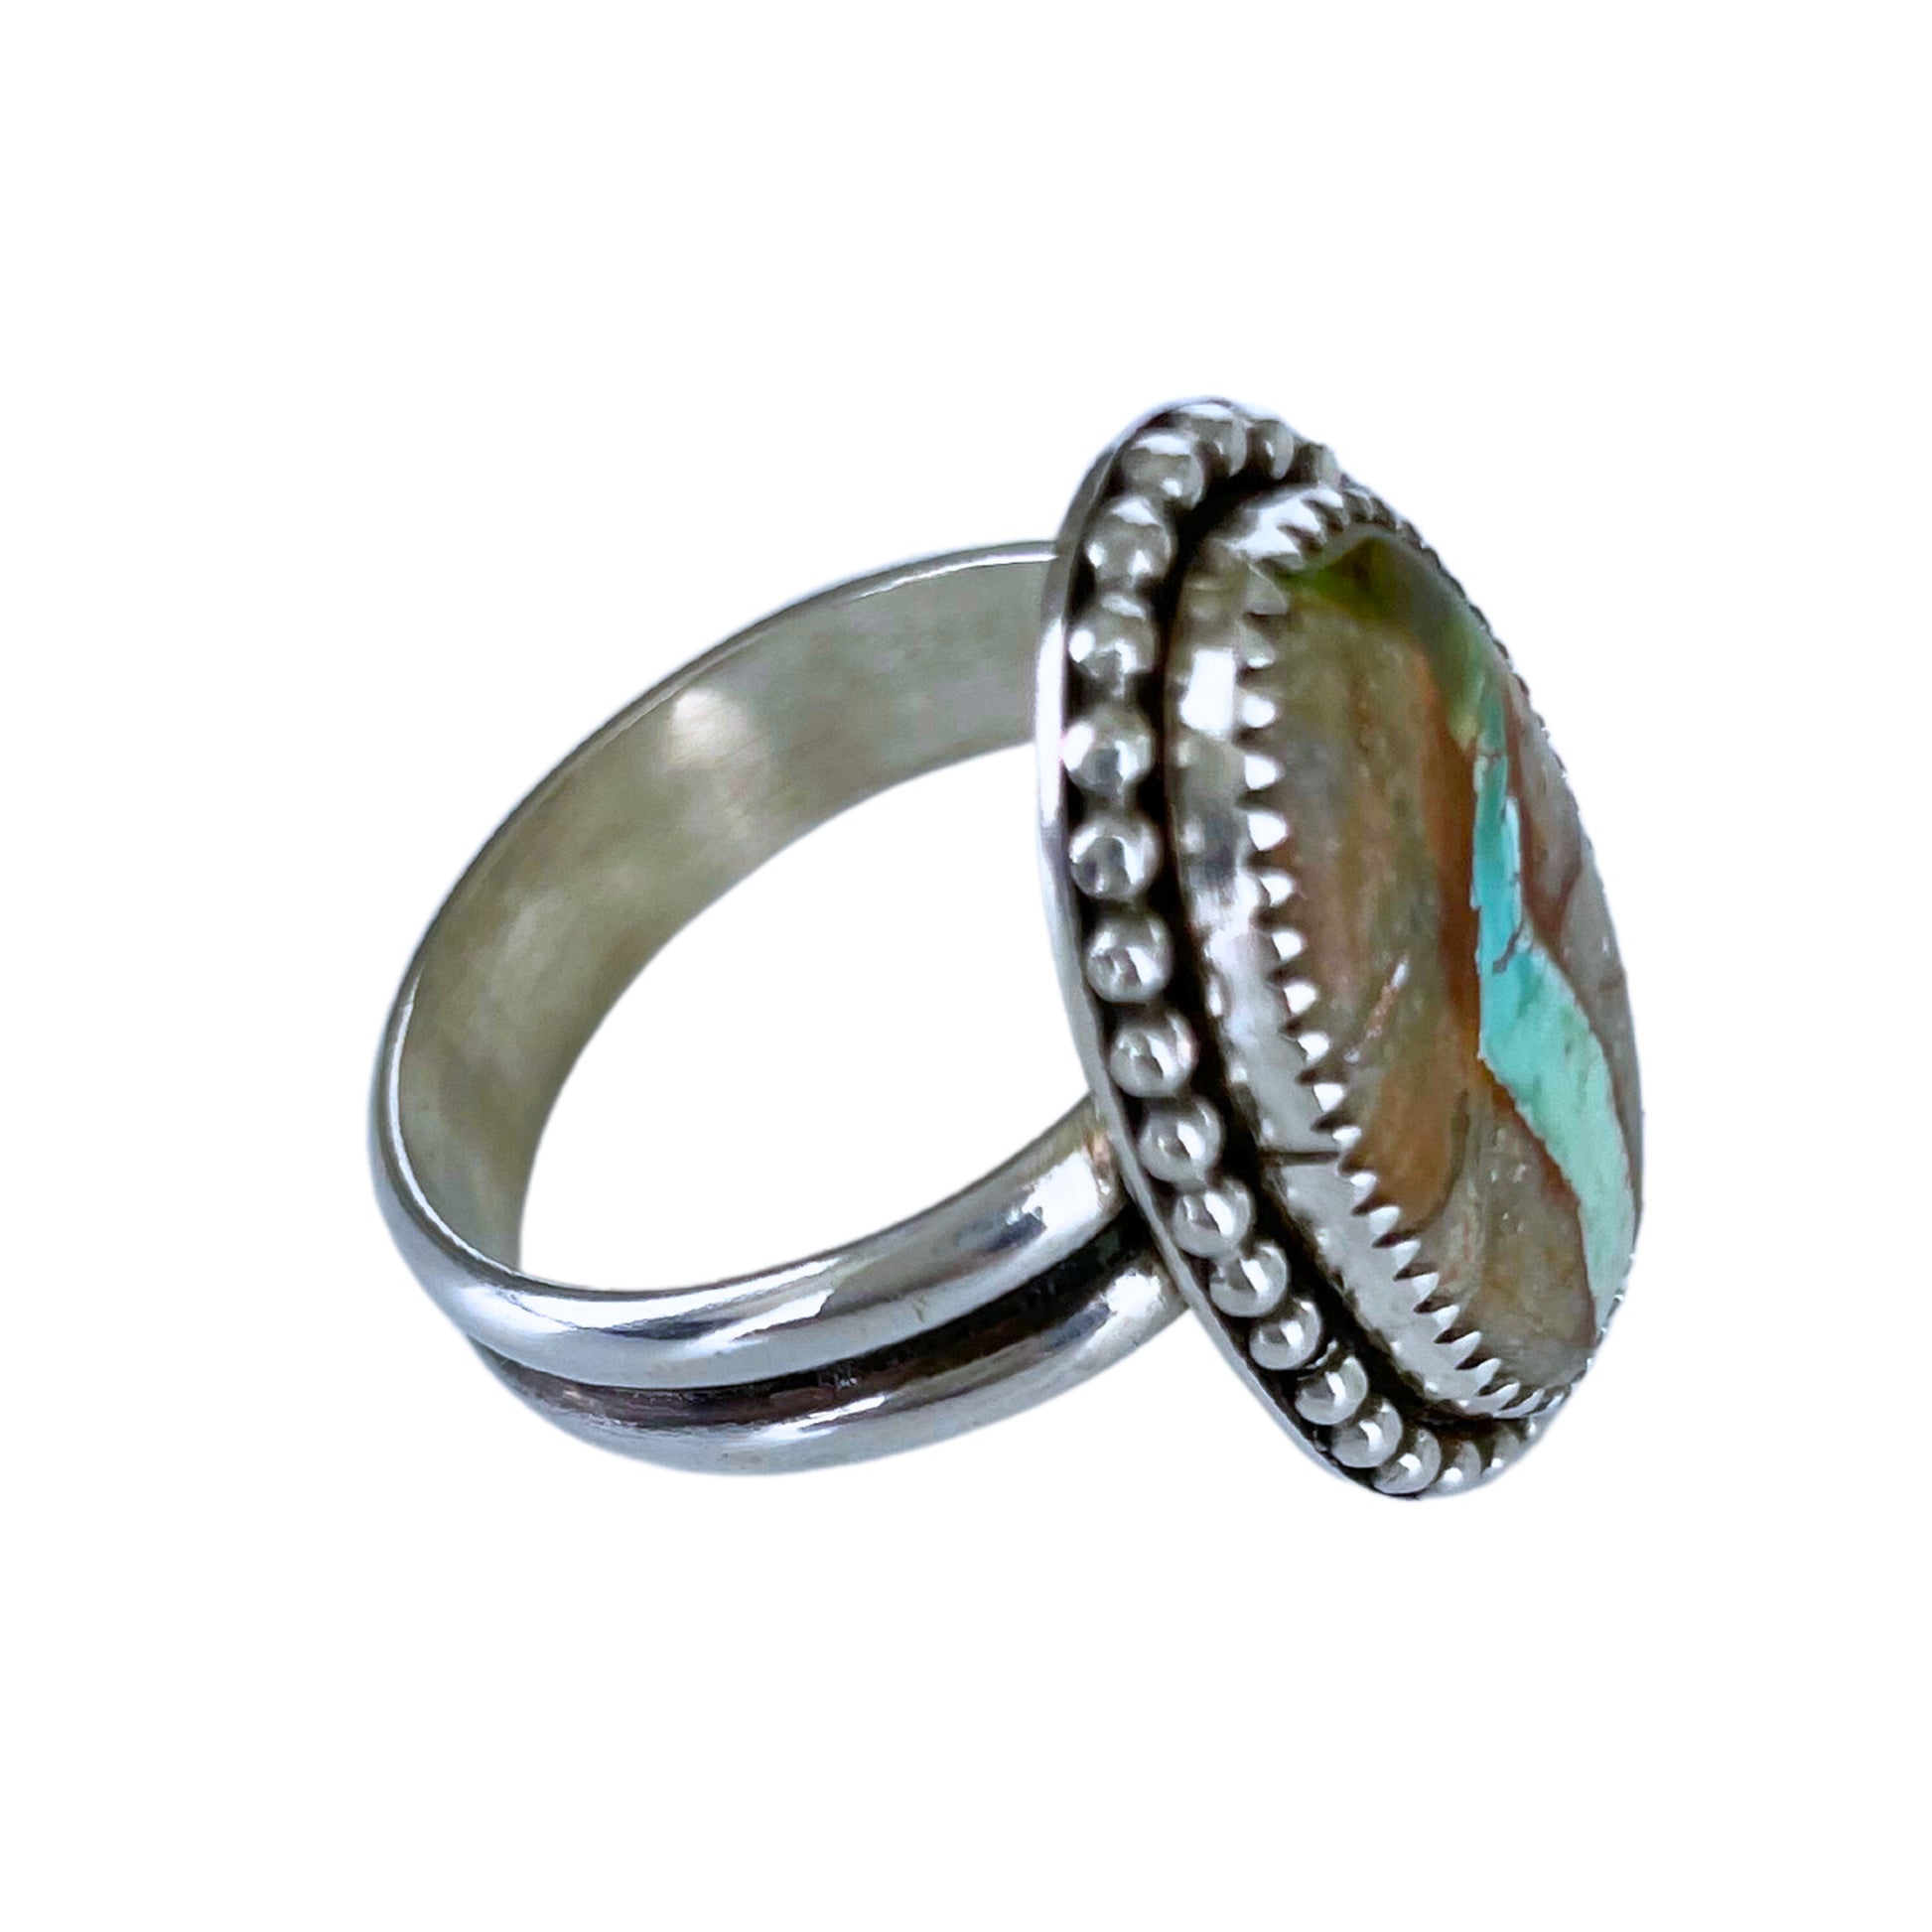 Royston Ribbon Turquoise Silver Ring, Size 9.5 - side view.